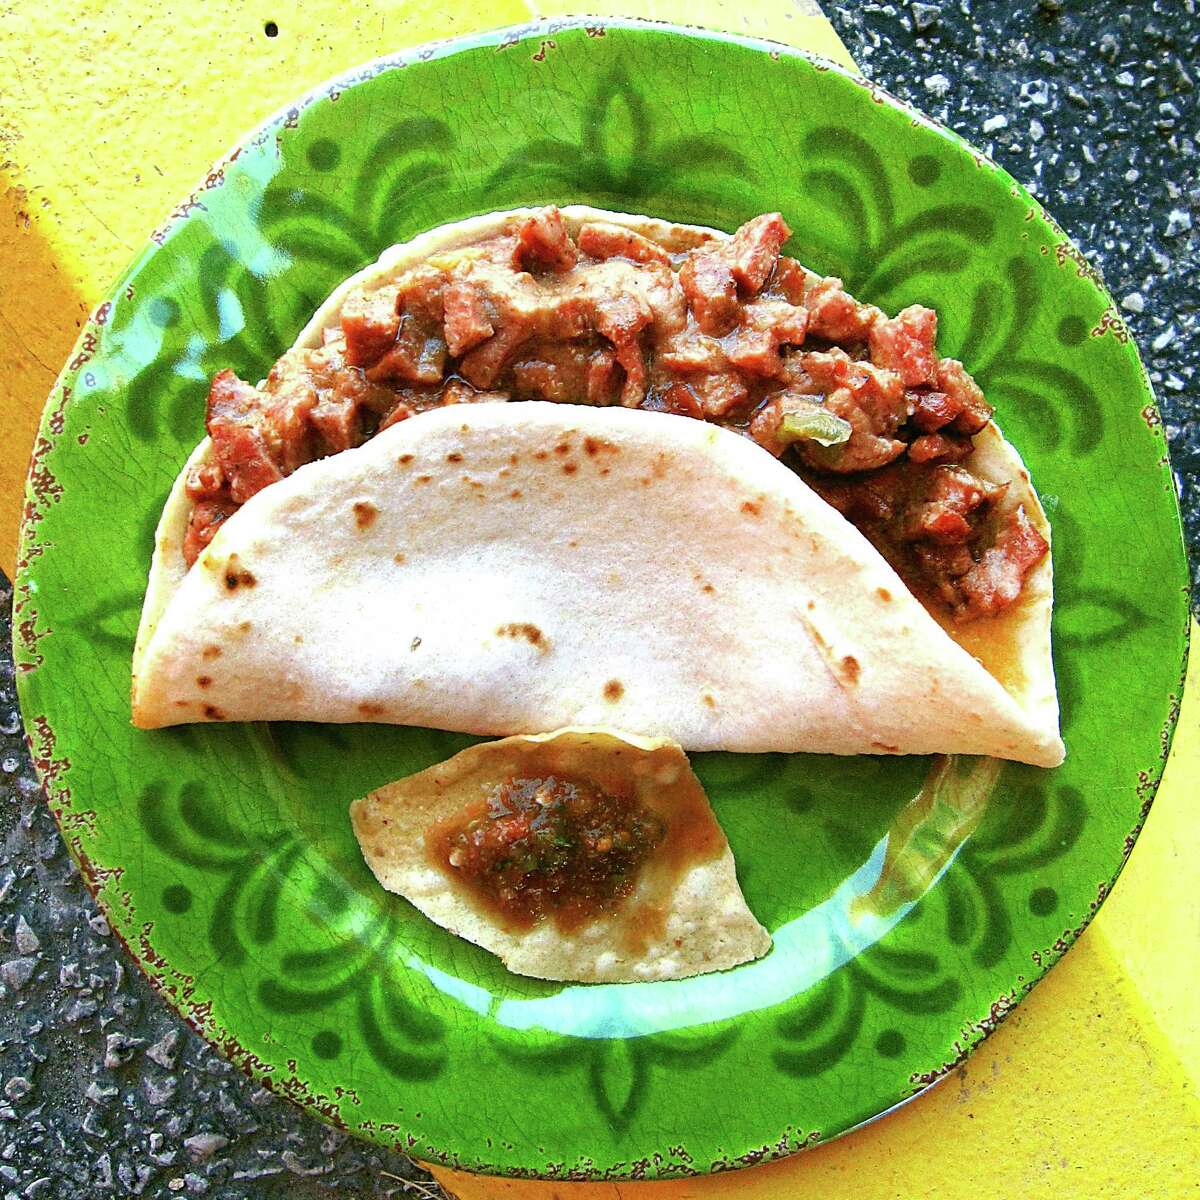 Country sausage guisada with beans on a handmade flour tortilla from the Curve Restaurant.